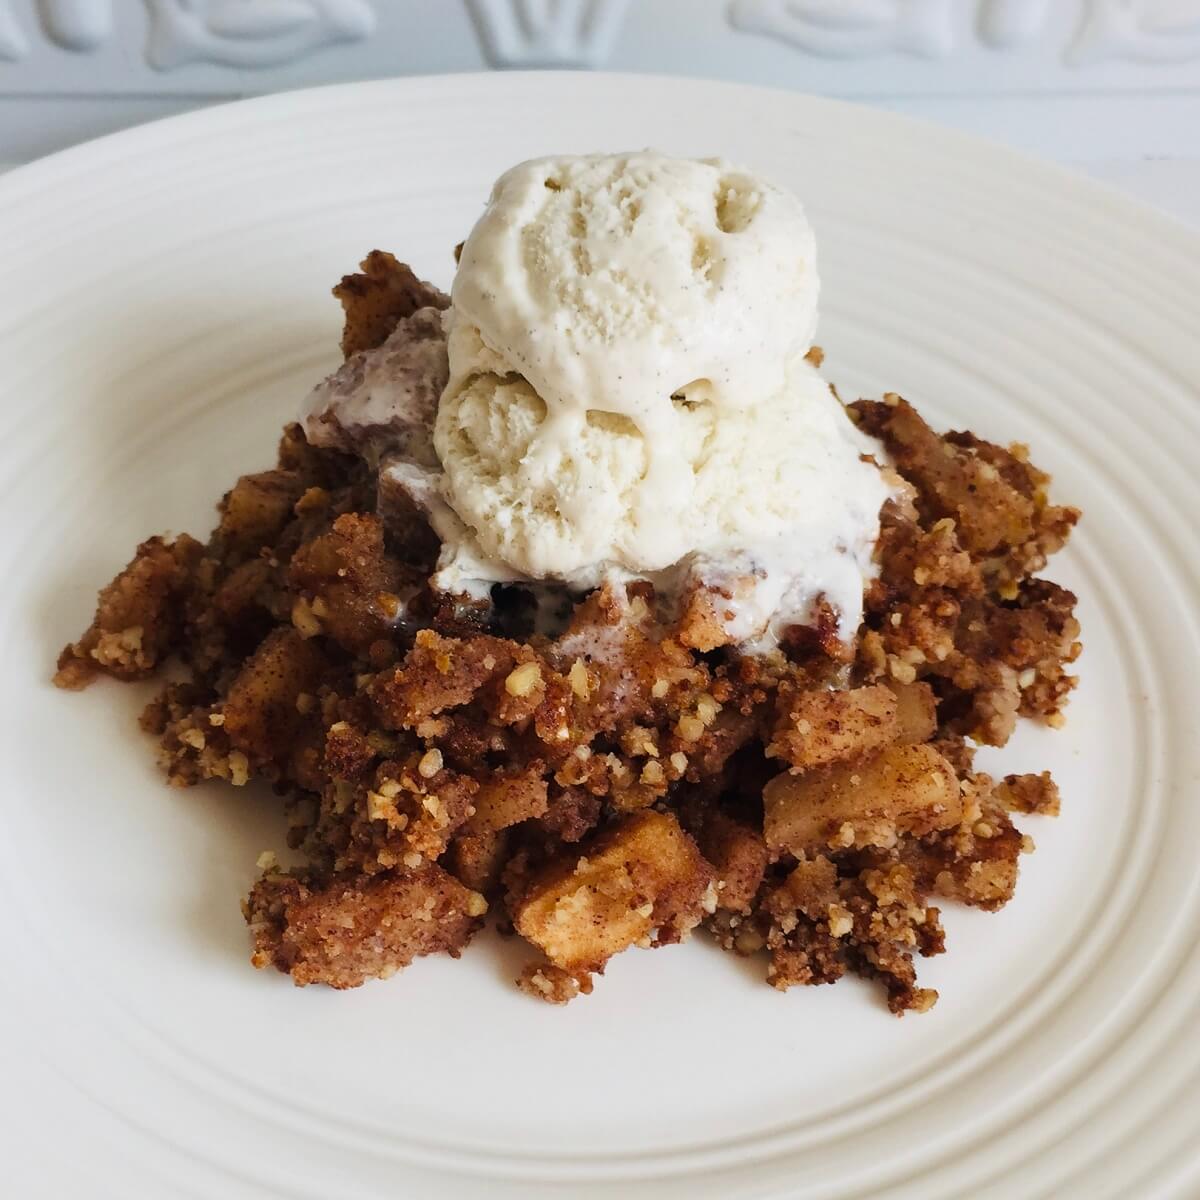 Vegan apple crumble on a white plate.